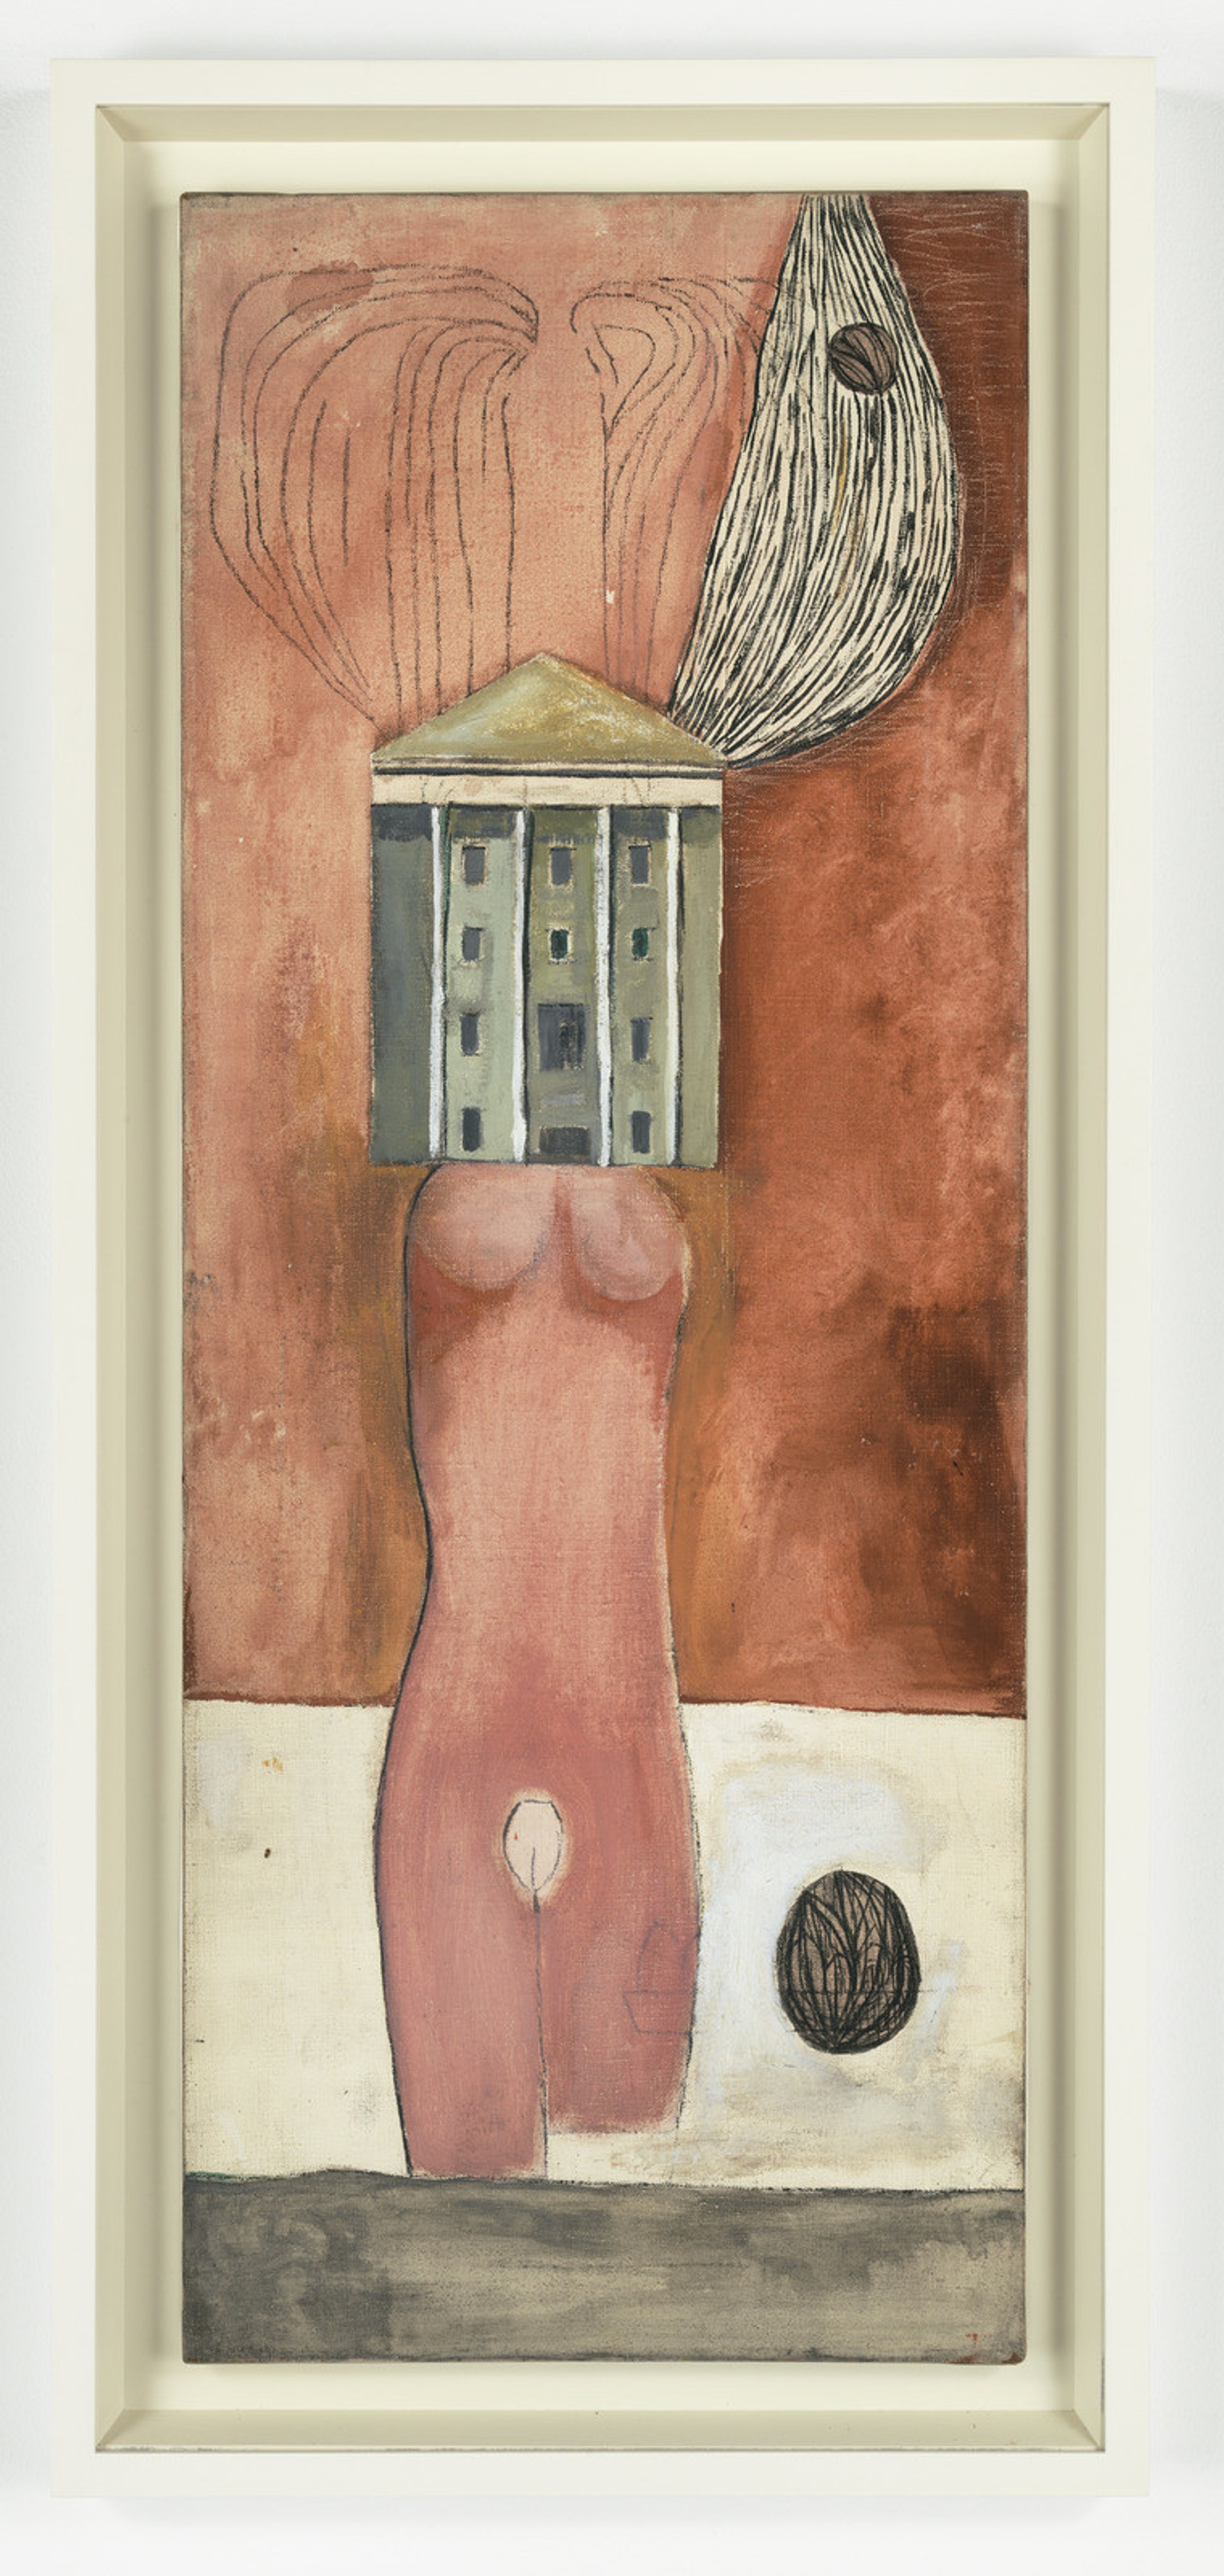 A print of artist Louise Bourgeois’ Femme Maison. A woman’s figure interrupted by a house covering from the bust to thee face in front of a muted red background.